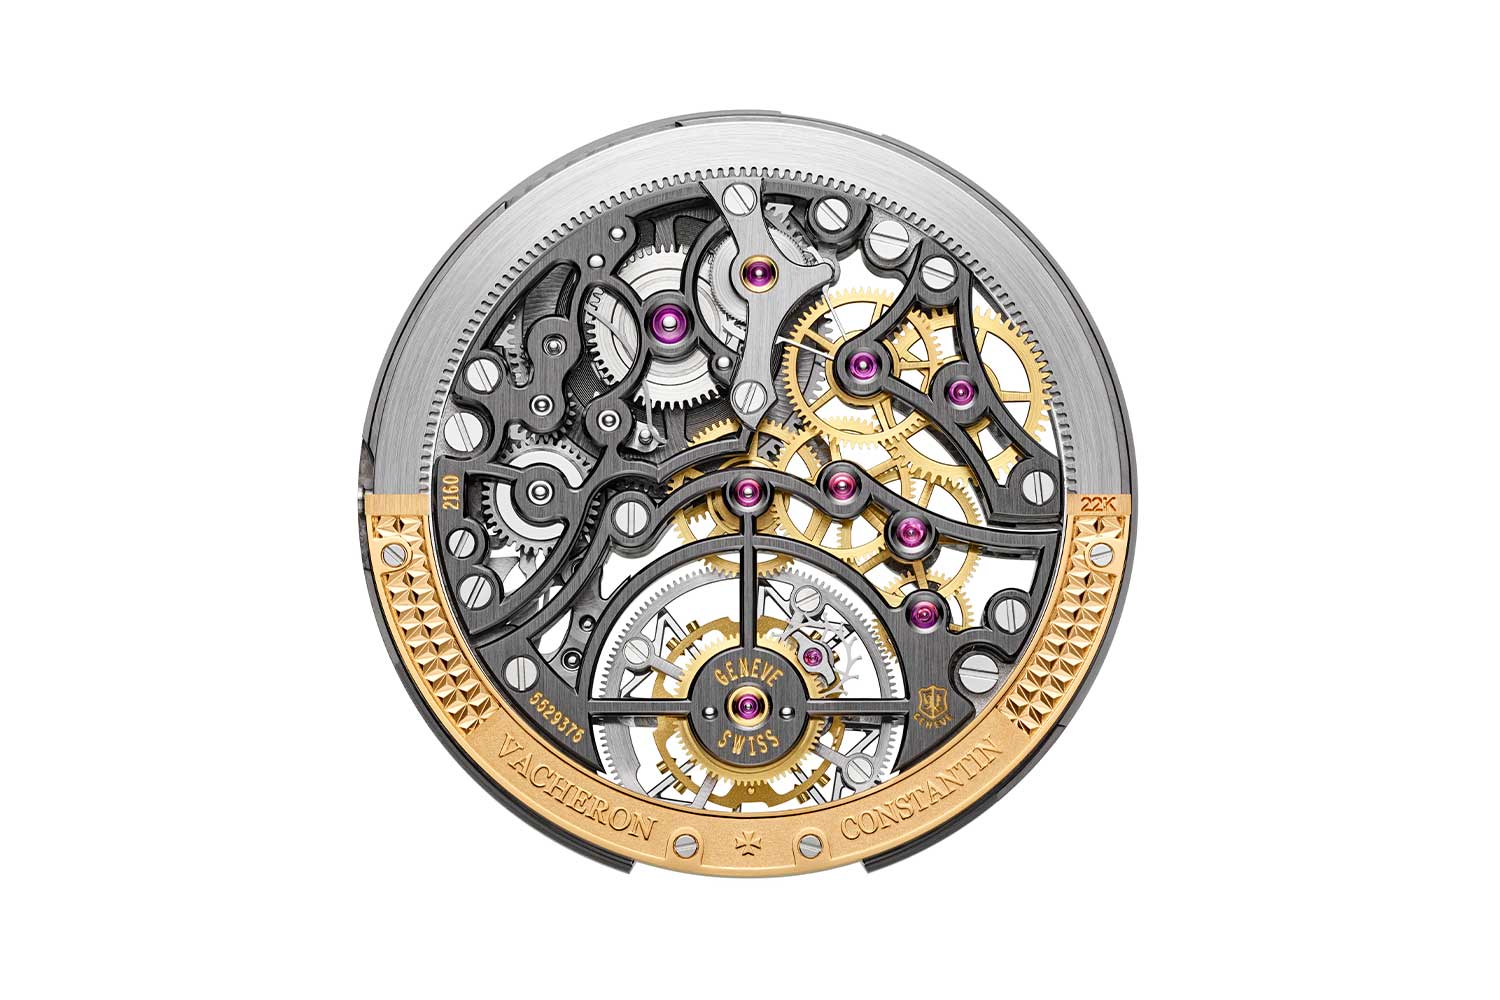 The Caliber 2160 SQ from the caseback side